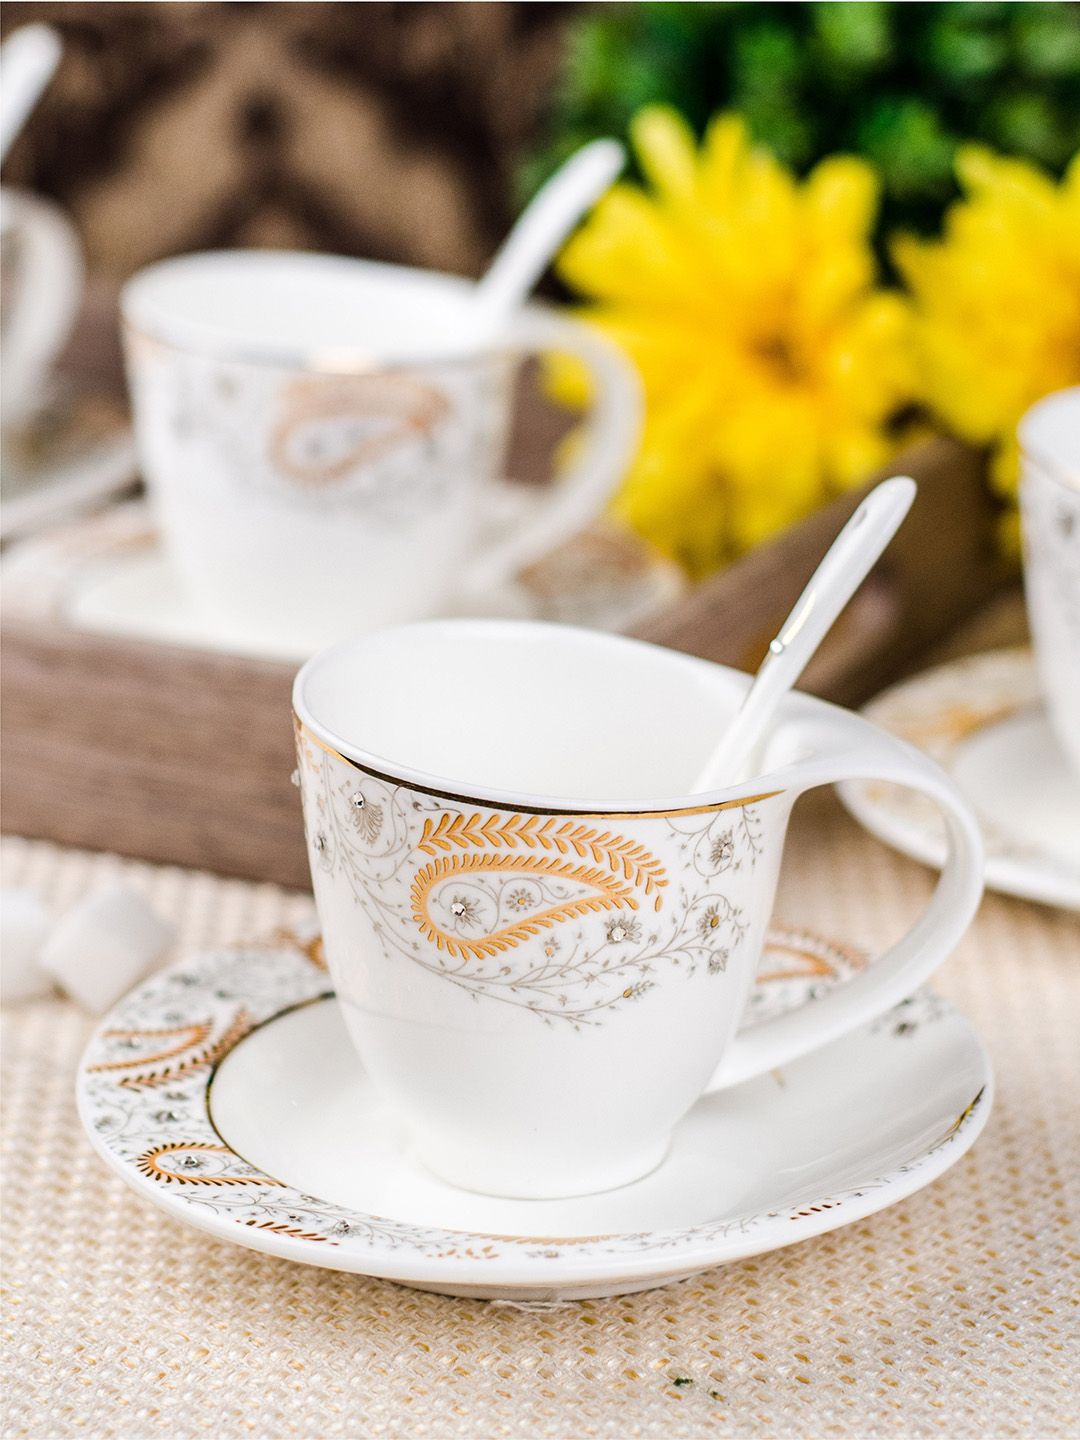 GOODHOMES White Printed Porcelain Cup & Saucer Set with Swarovski Studded & 24k Gold Print Price in India